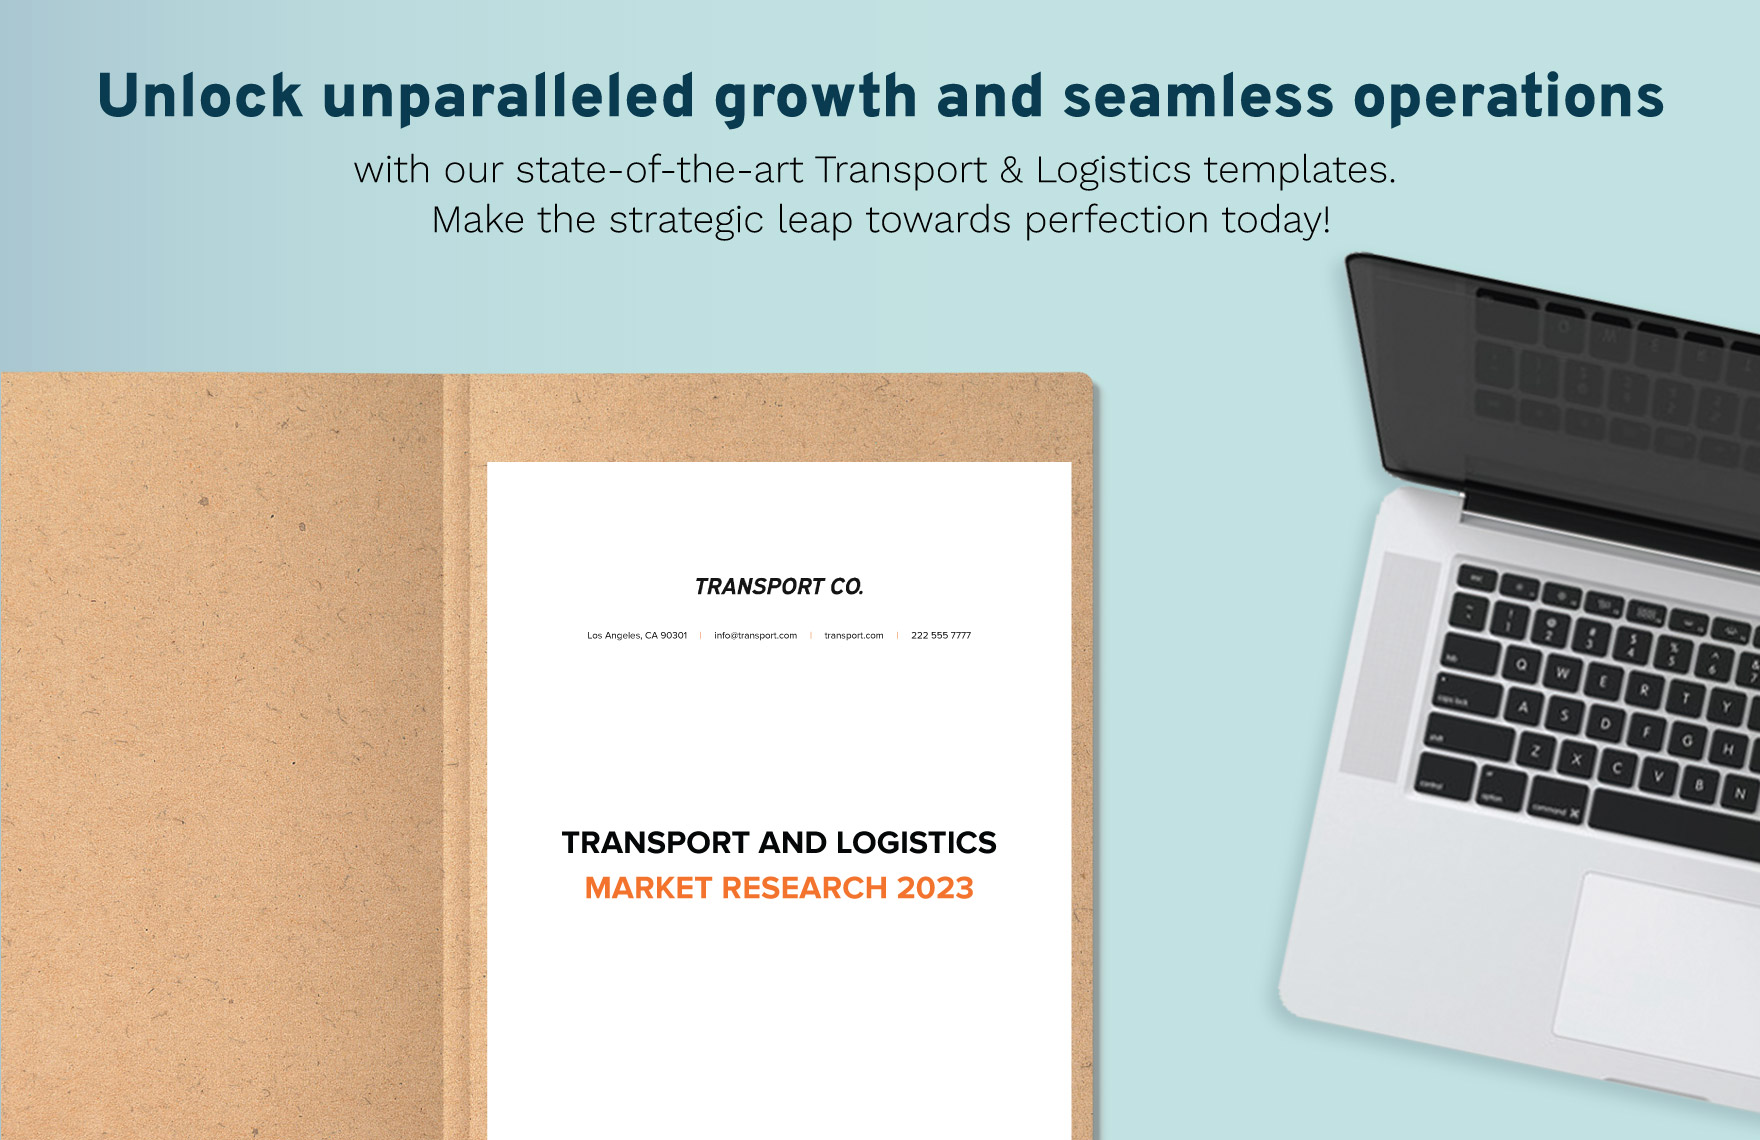 Transport and Logistics Market Research 2023 Template